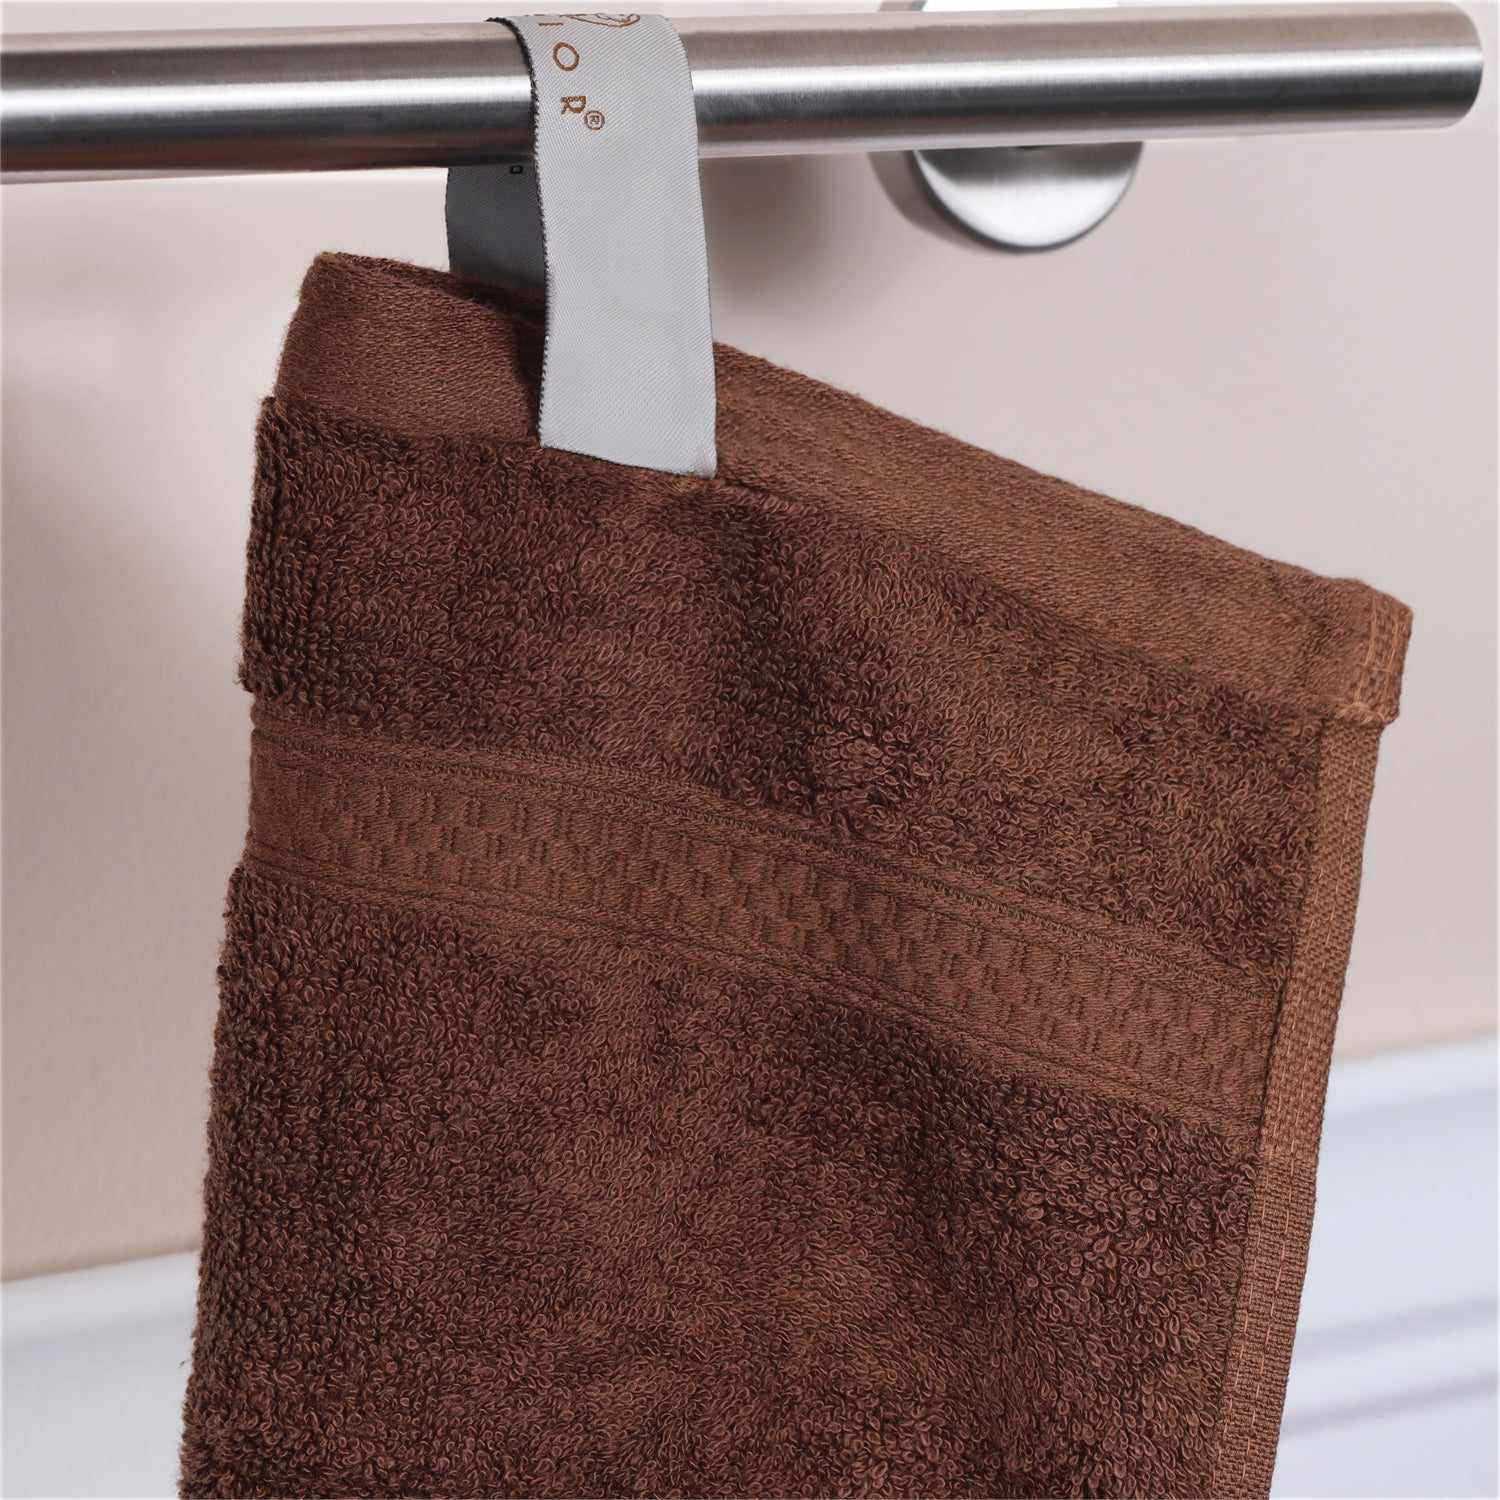  Ultra-Soft Hypoallergenic Rayon from Bamboo Cotton Blend Bath and Face Towel Set -  Cocoa